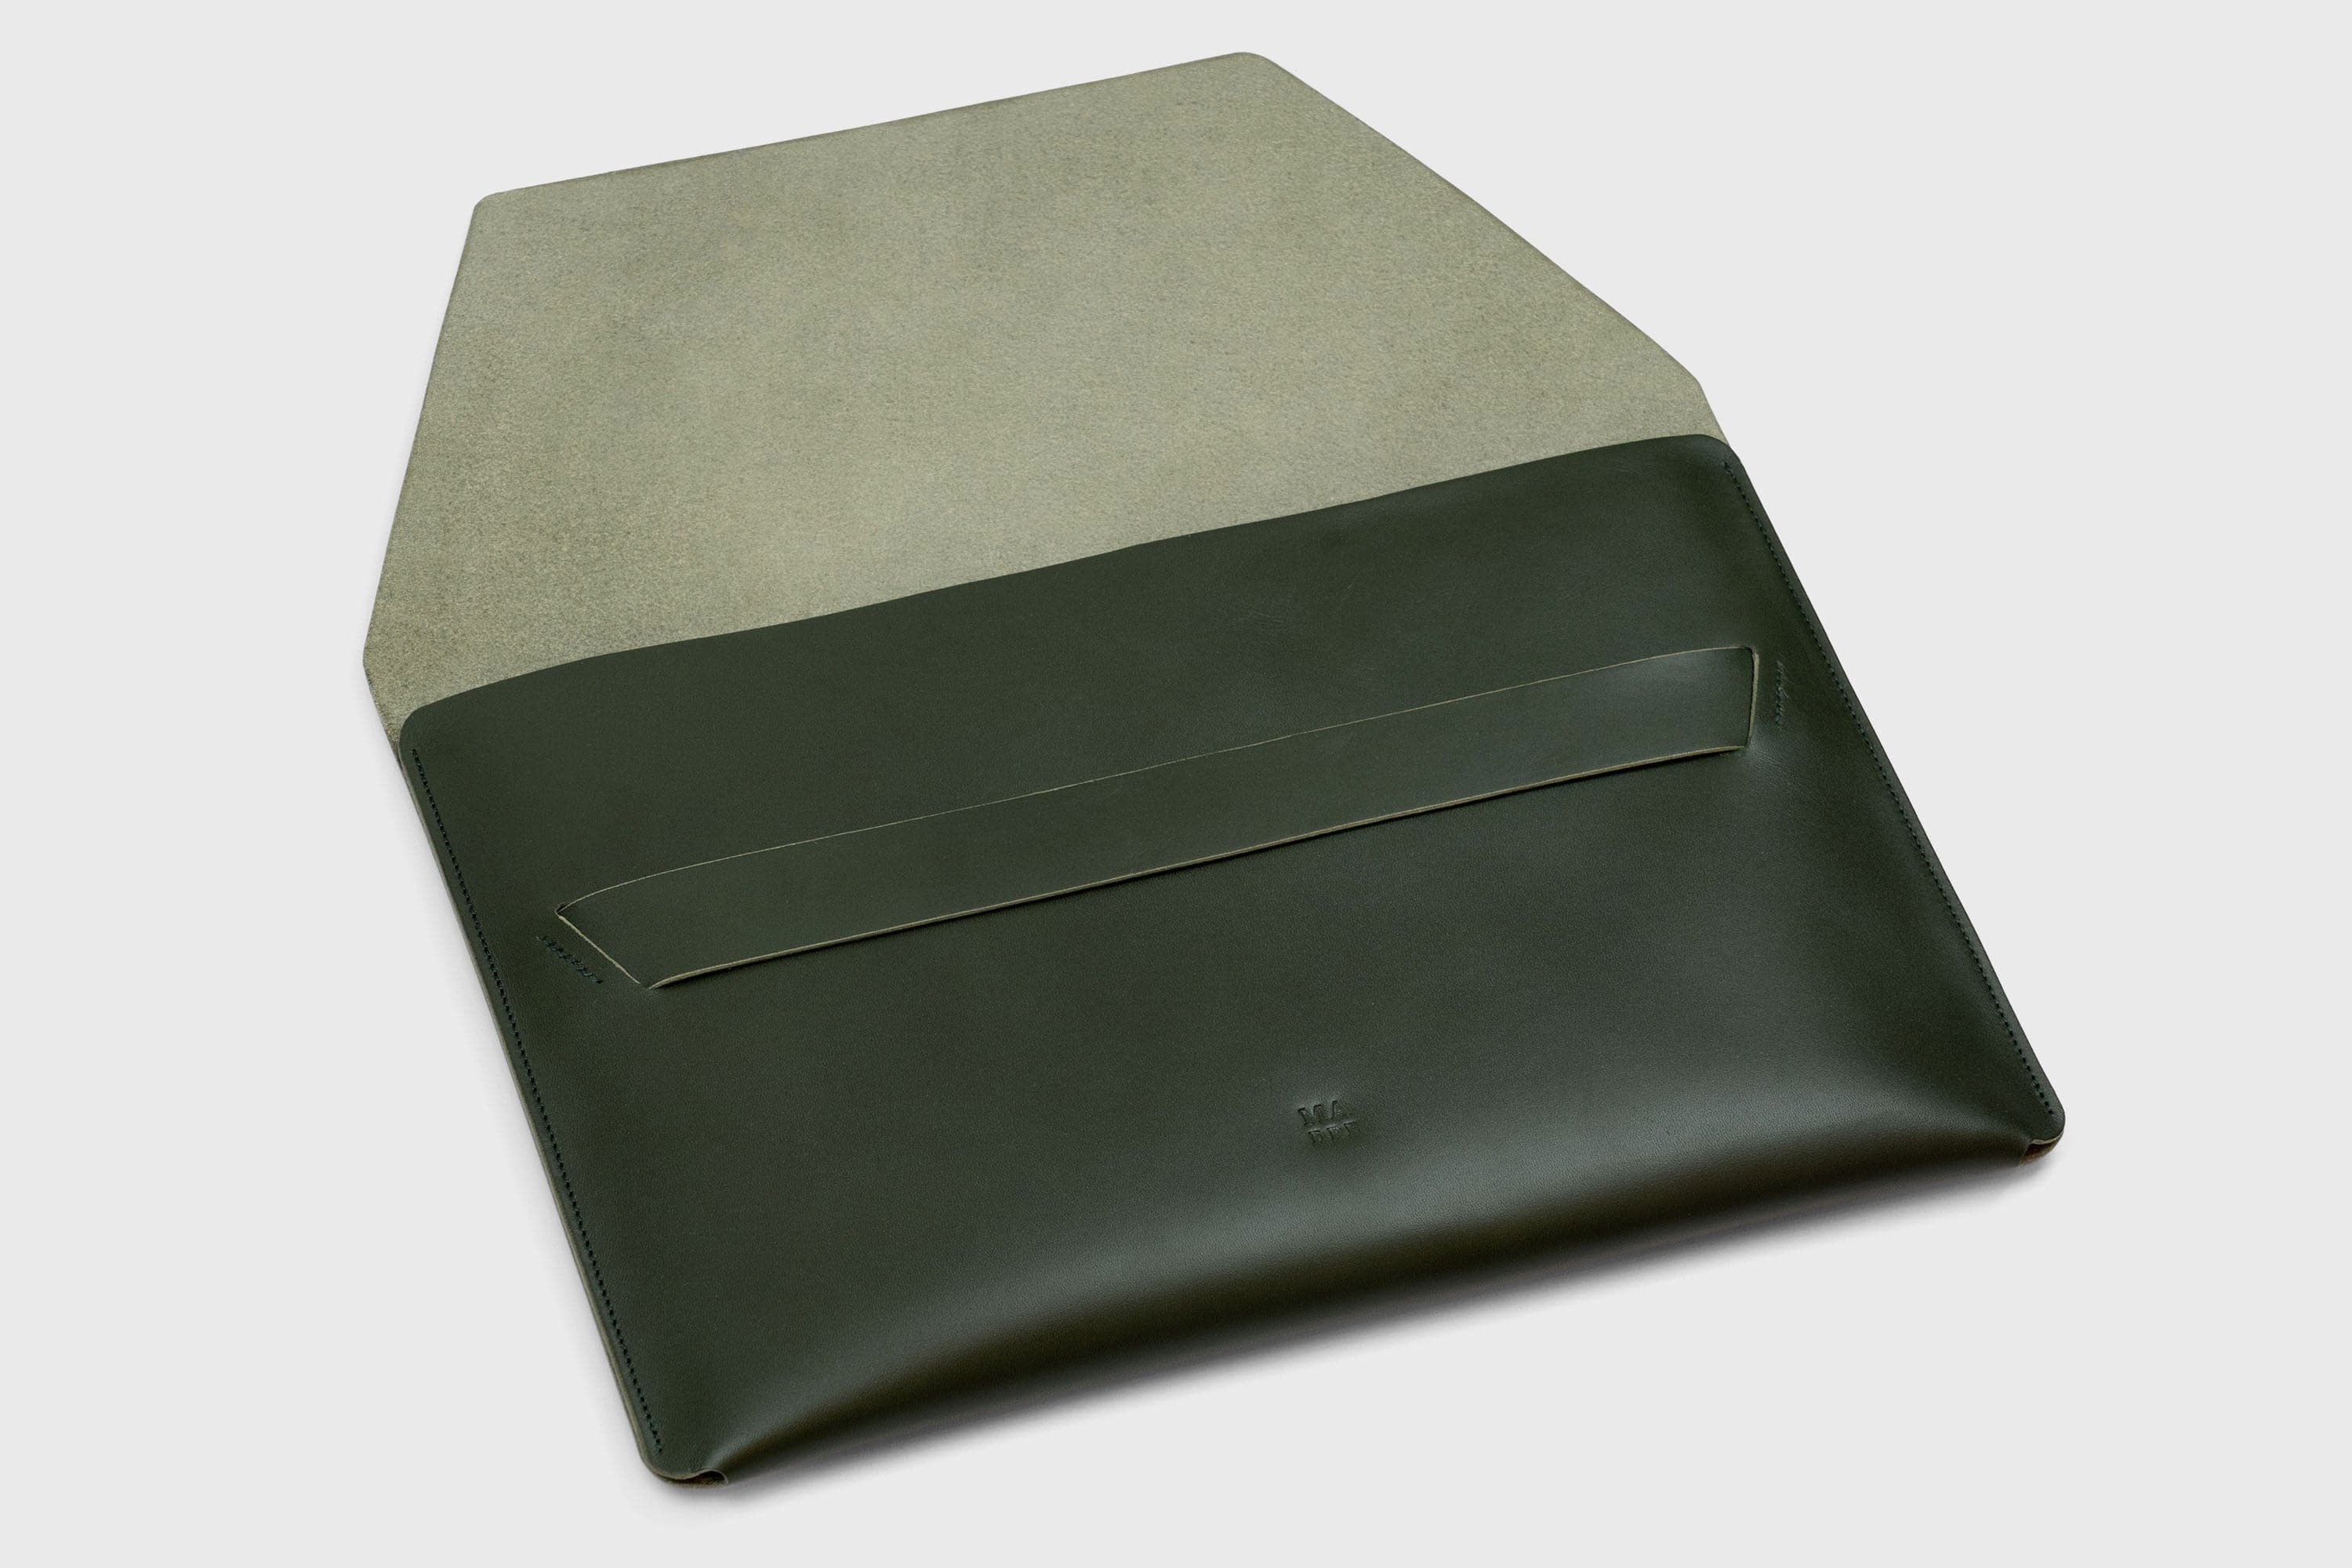 MacBook Sleeve 16 Inch Leather Dark Olive Green Artisanal Vegetable Tanned Leather Exclusive Quality Design By Manuel Dreesmann Atelier Madre Barcelona Spain